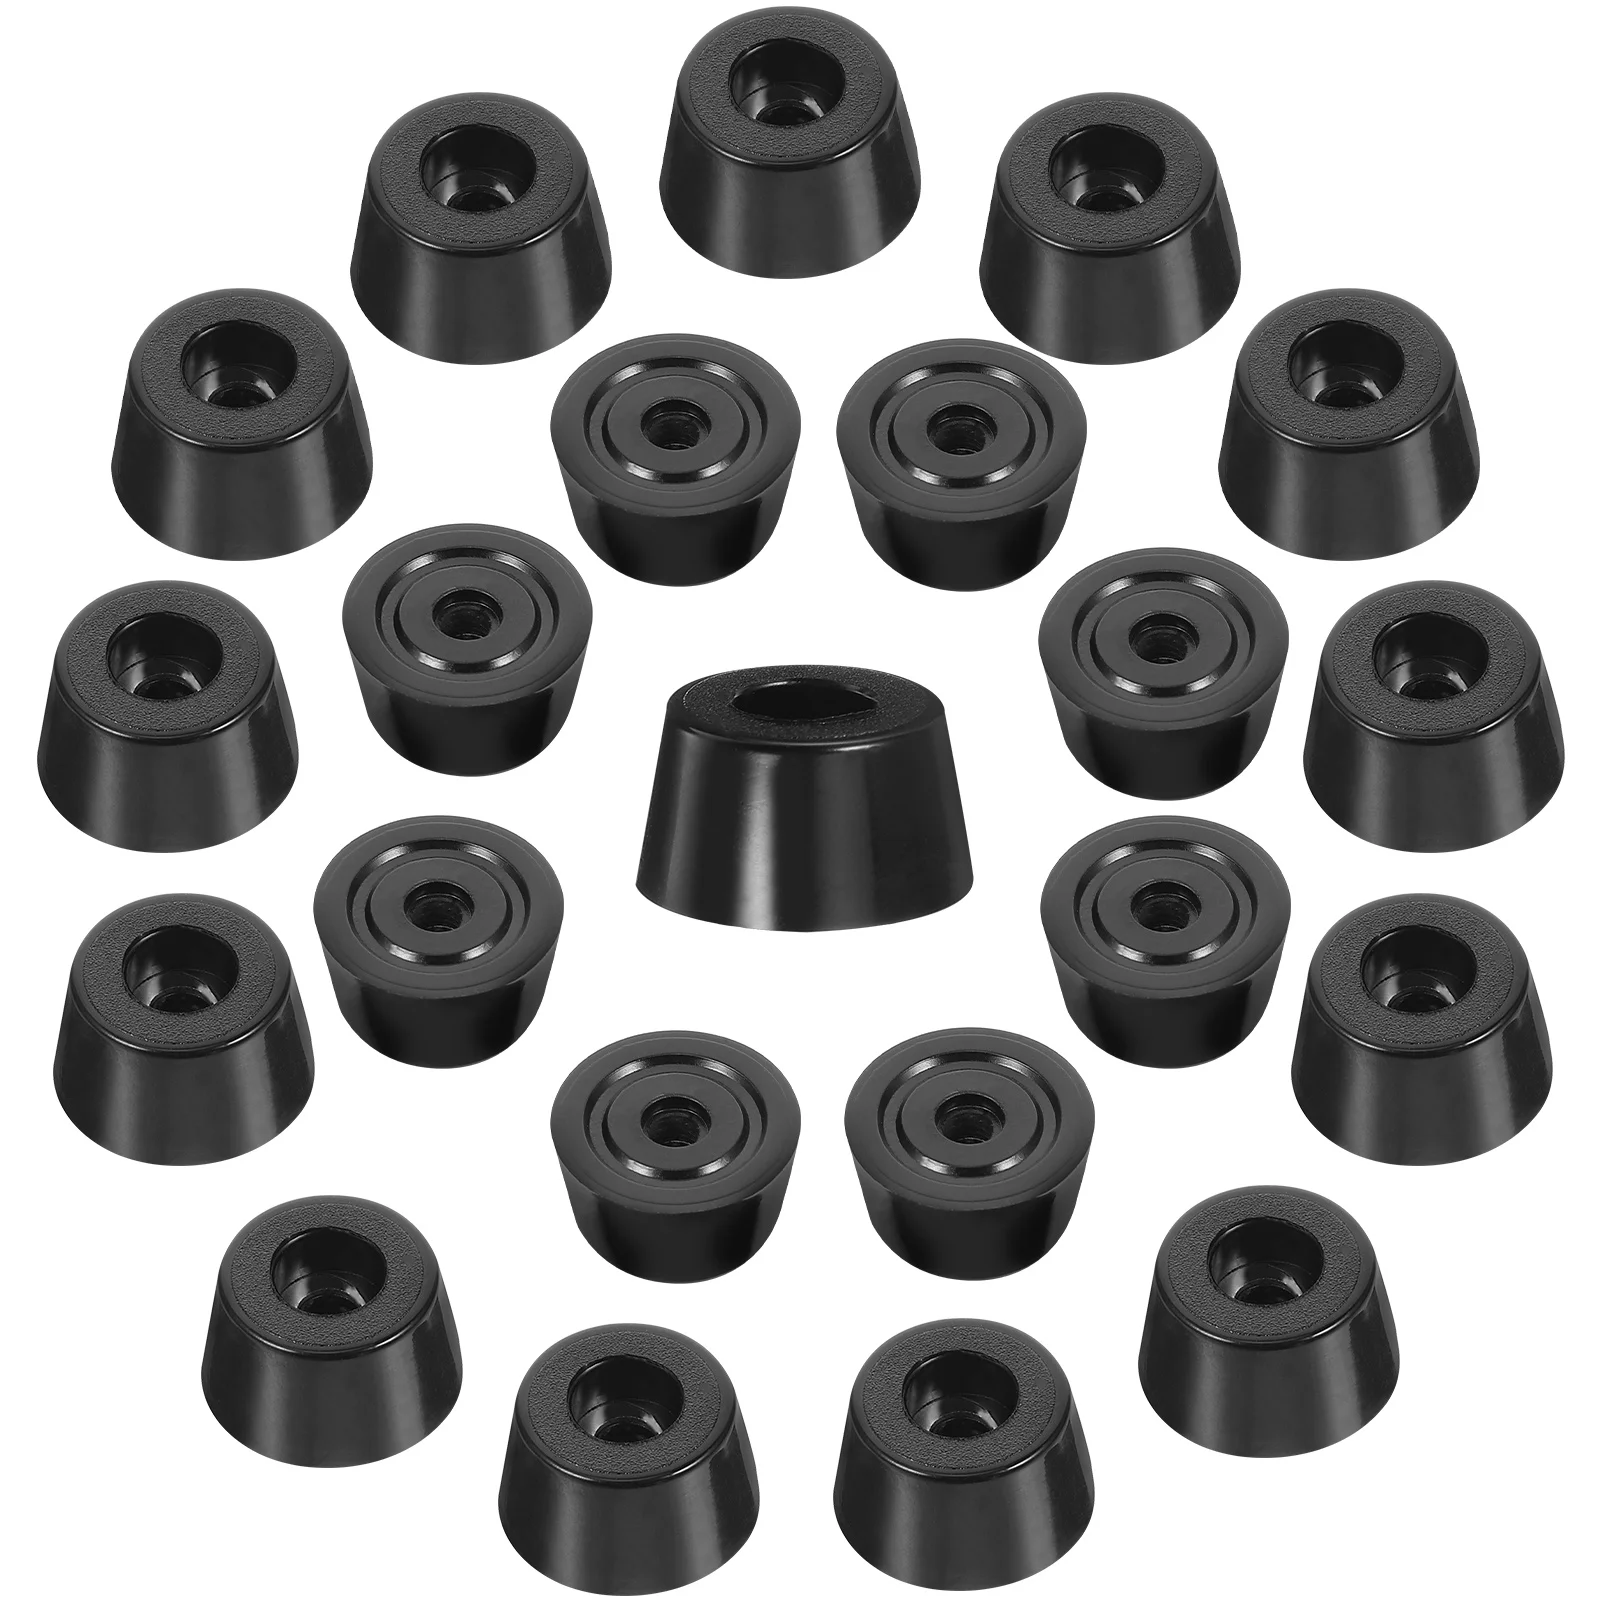 

50 Pcs Chair Leveler Chairs Desk Wheels Casters Foot Pads Fixed Feet Office Conical